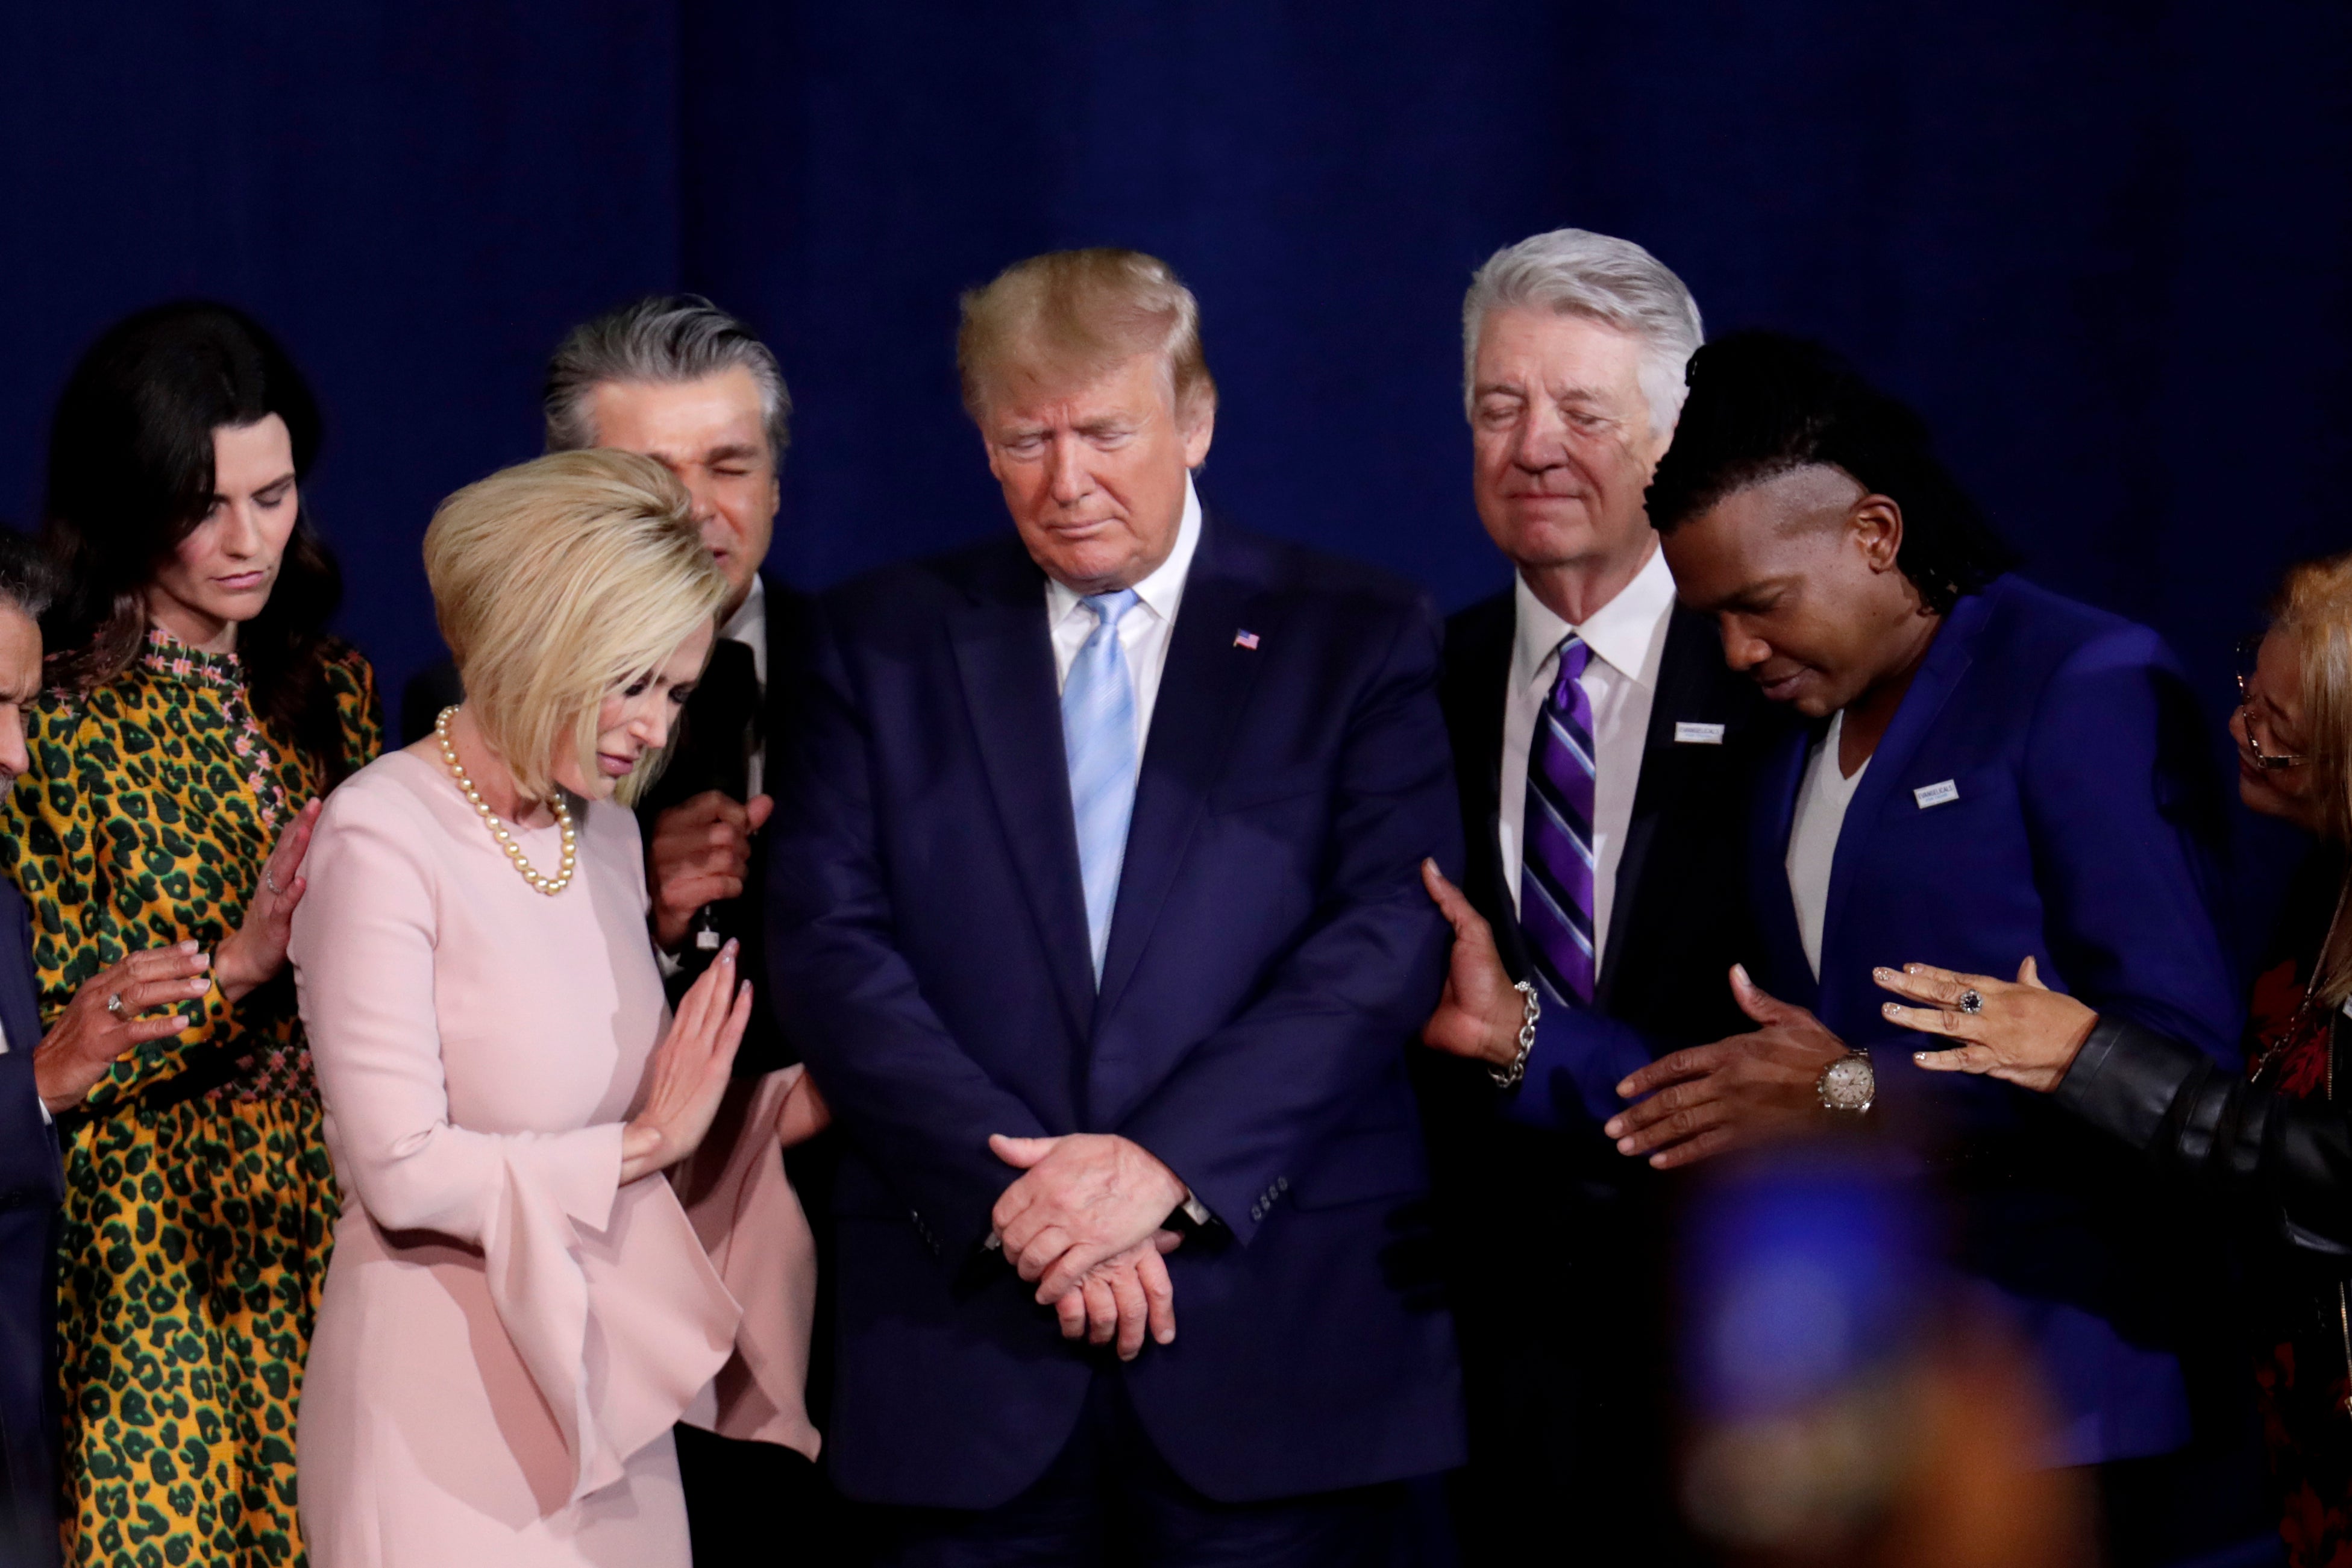 Pastor Paula White, left, and other faith leaders pray with President Donald Trump, center, during a rally for evangelical supporters at the King Jesus International Ministry church, Friday, Jan. 3, 2020